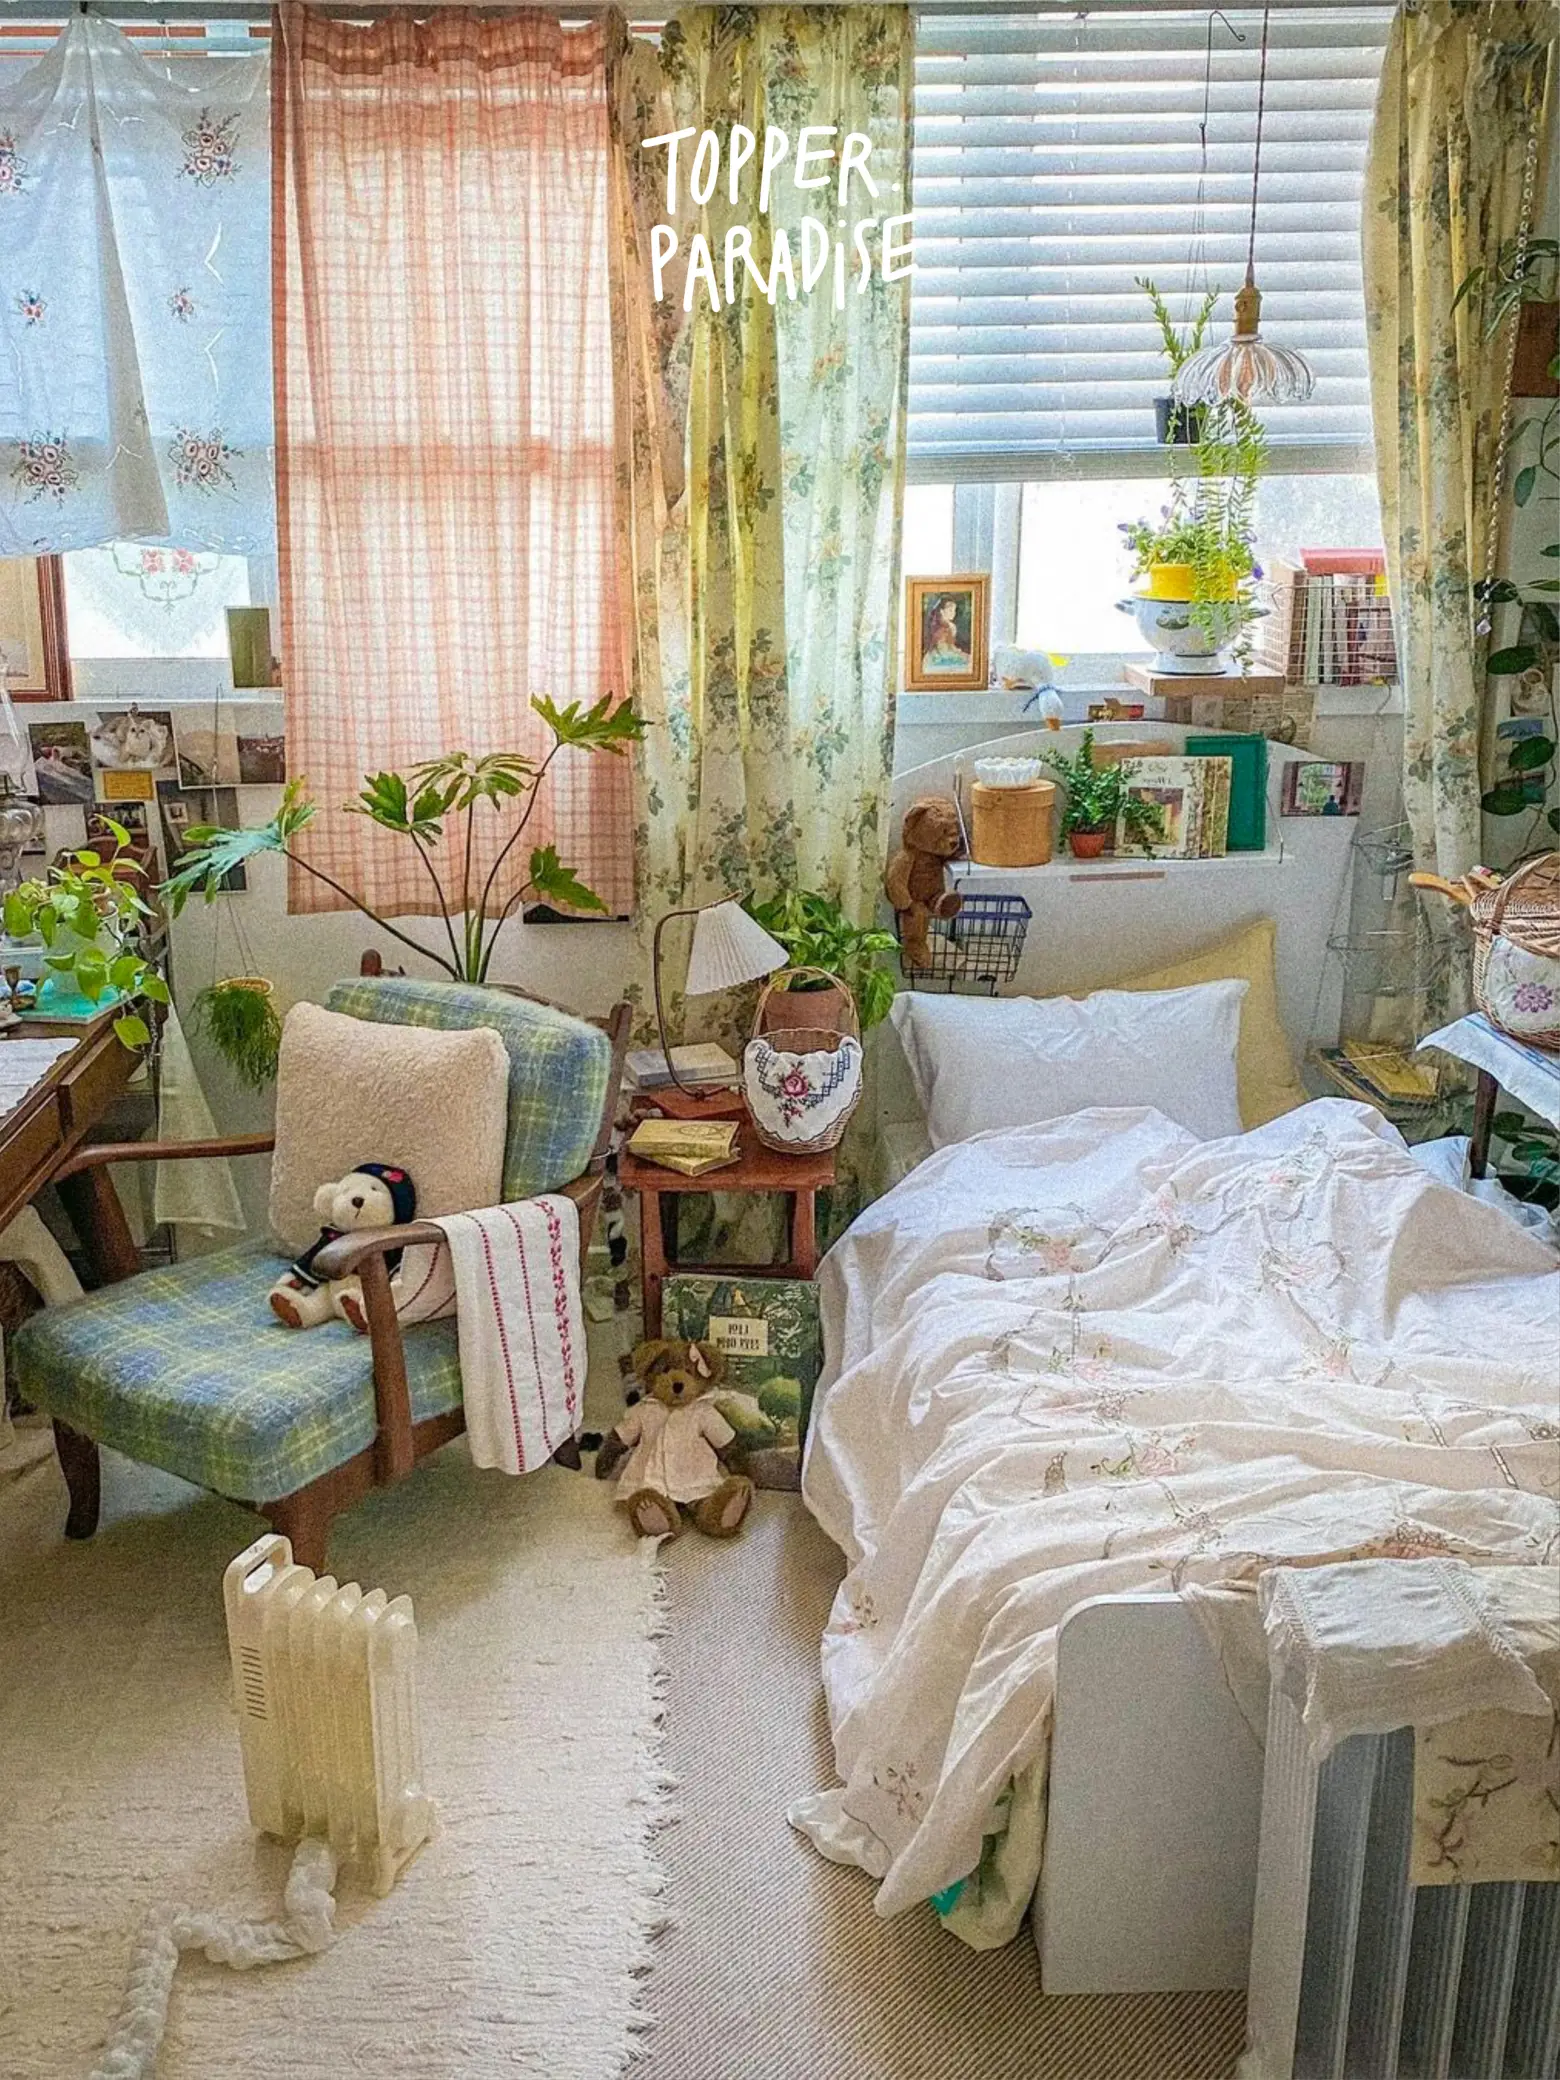 How To Achieve The Fairycore Aesthetic Room Of Your Dreams